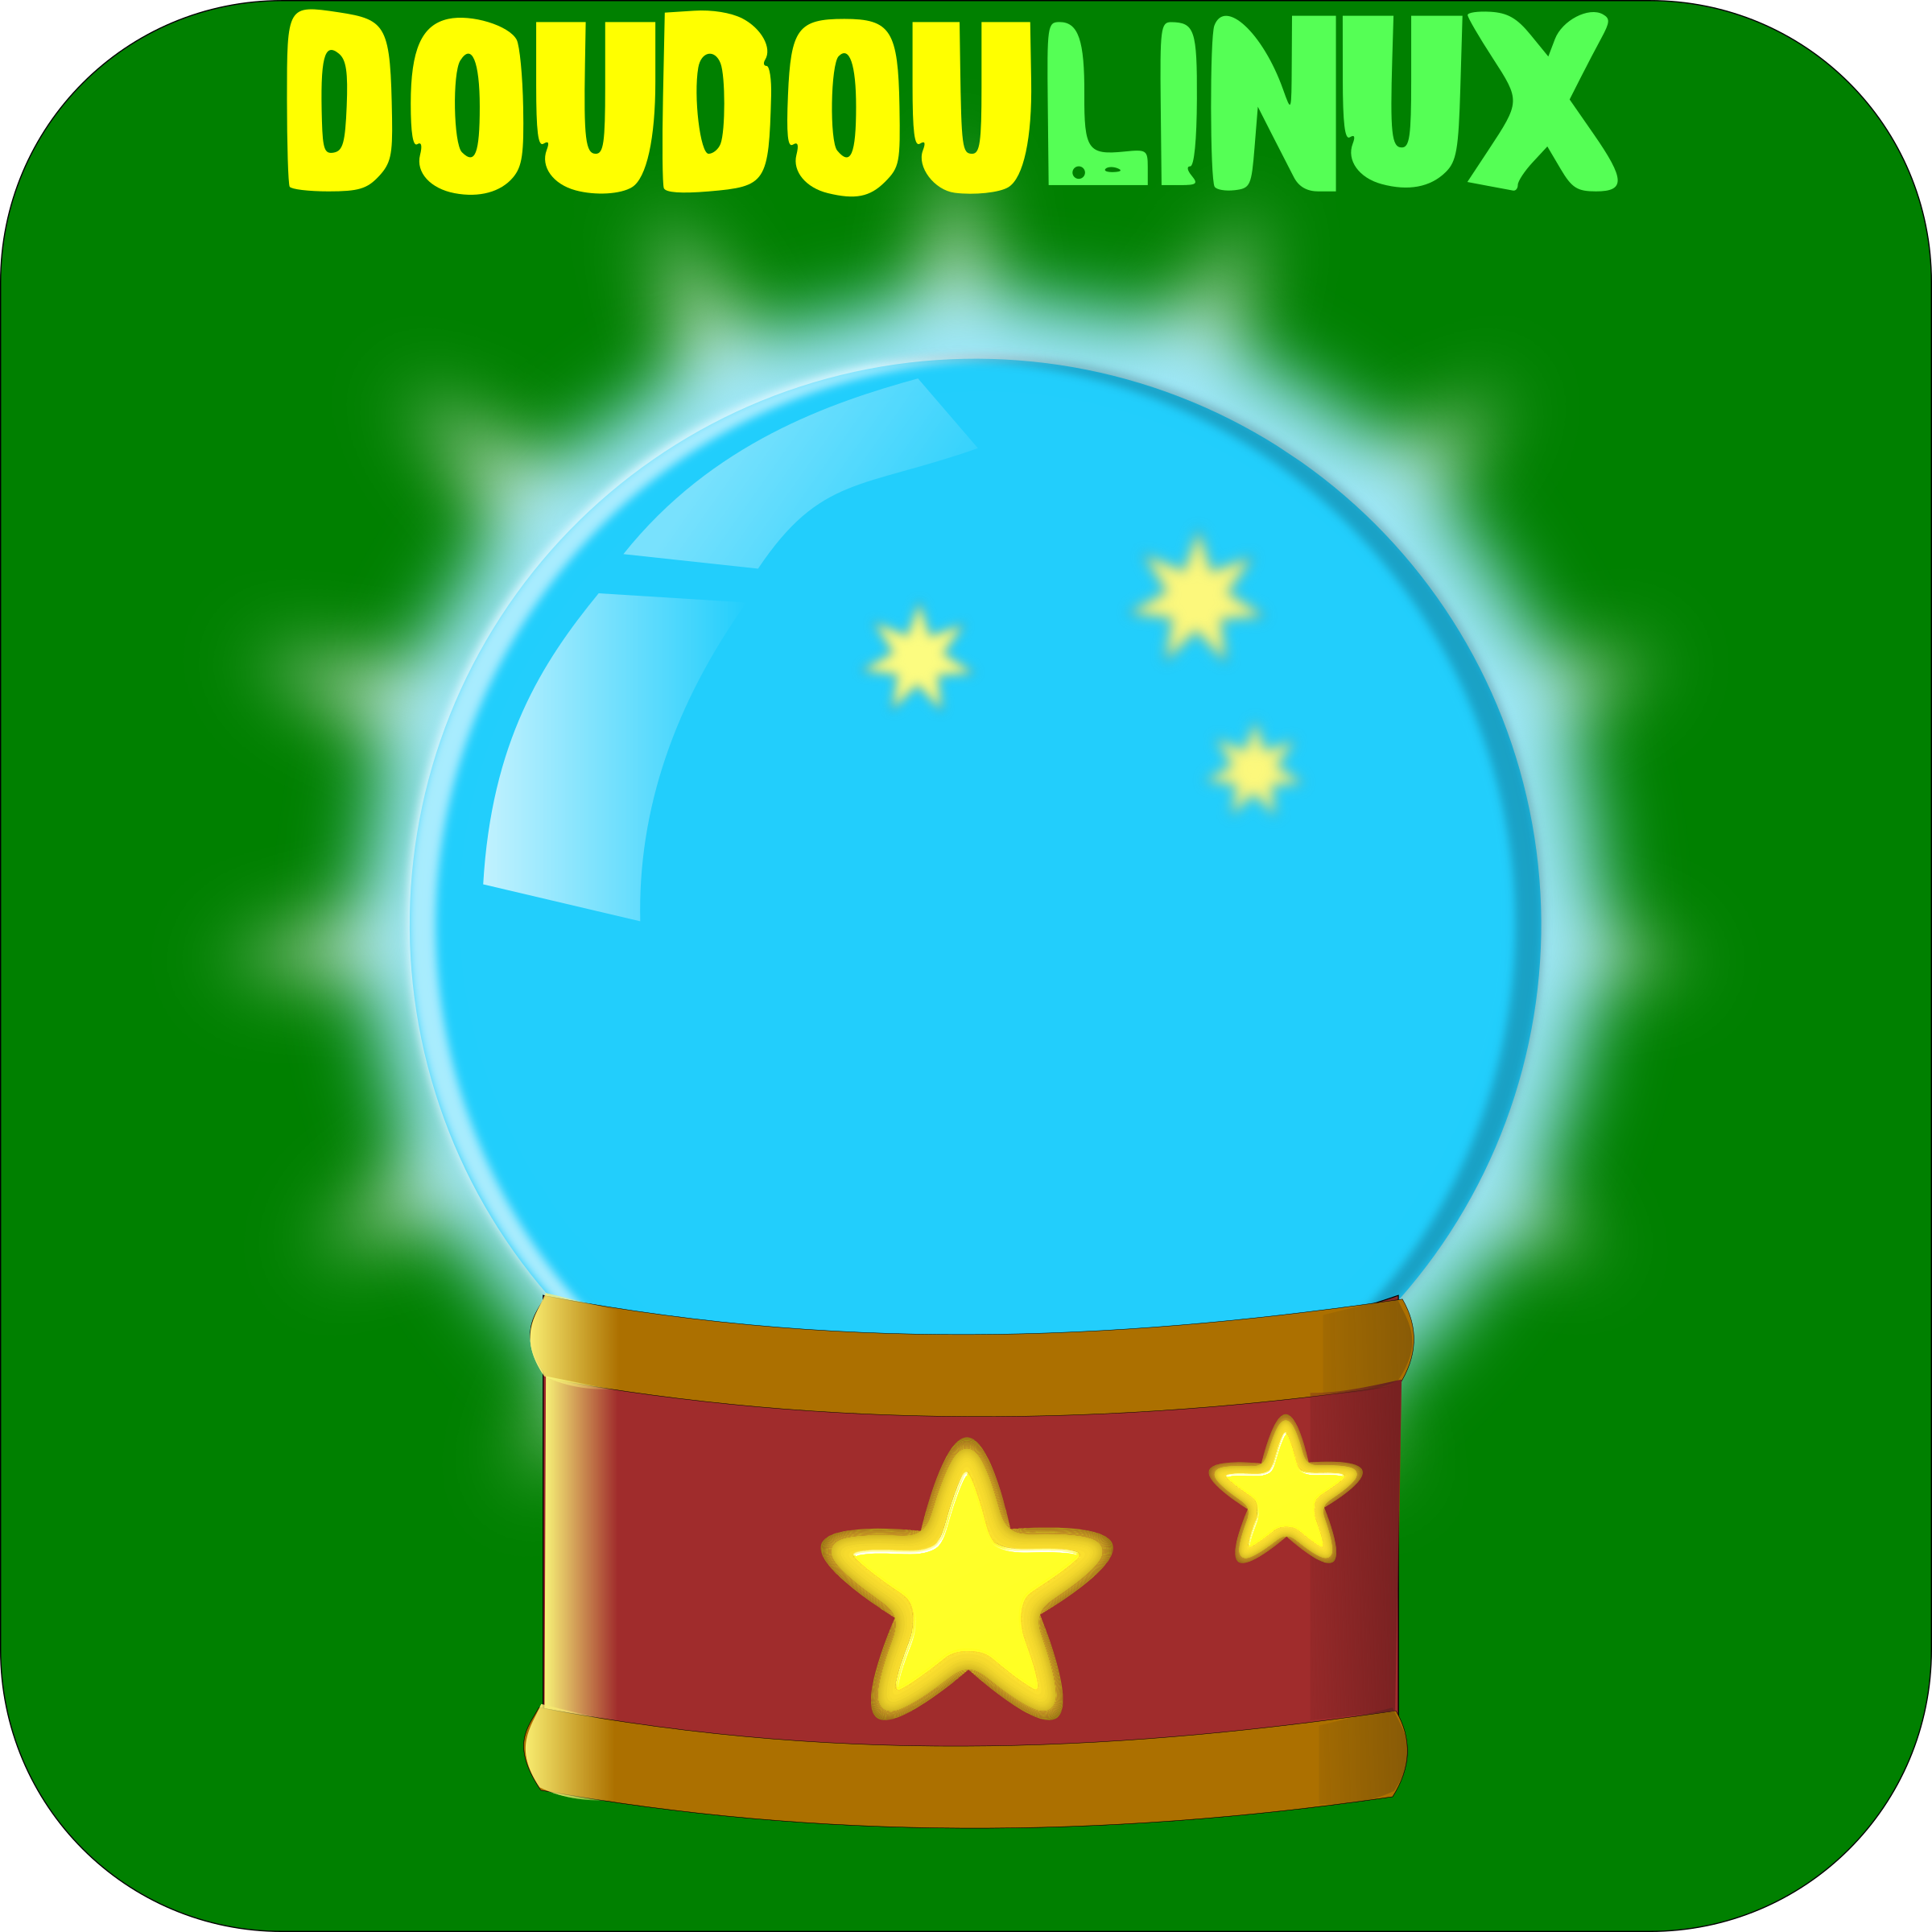 doudoulinux crystal ball 2 SVG Clip arts